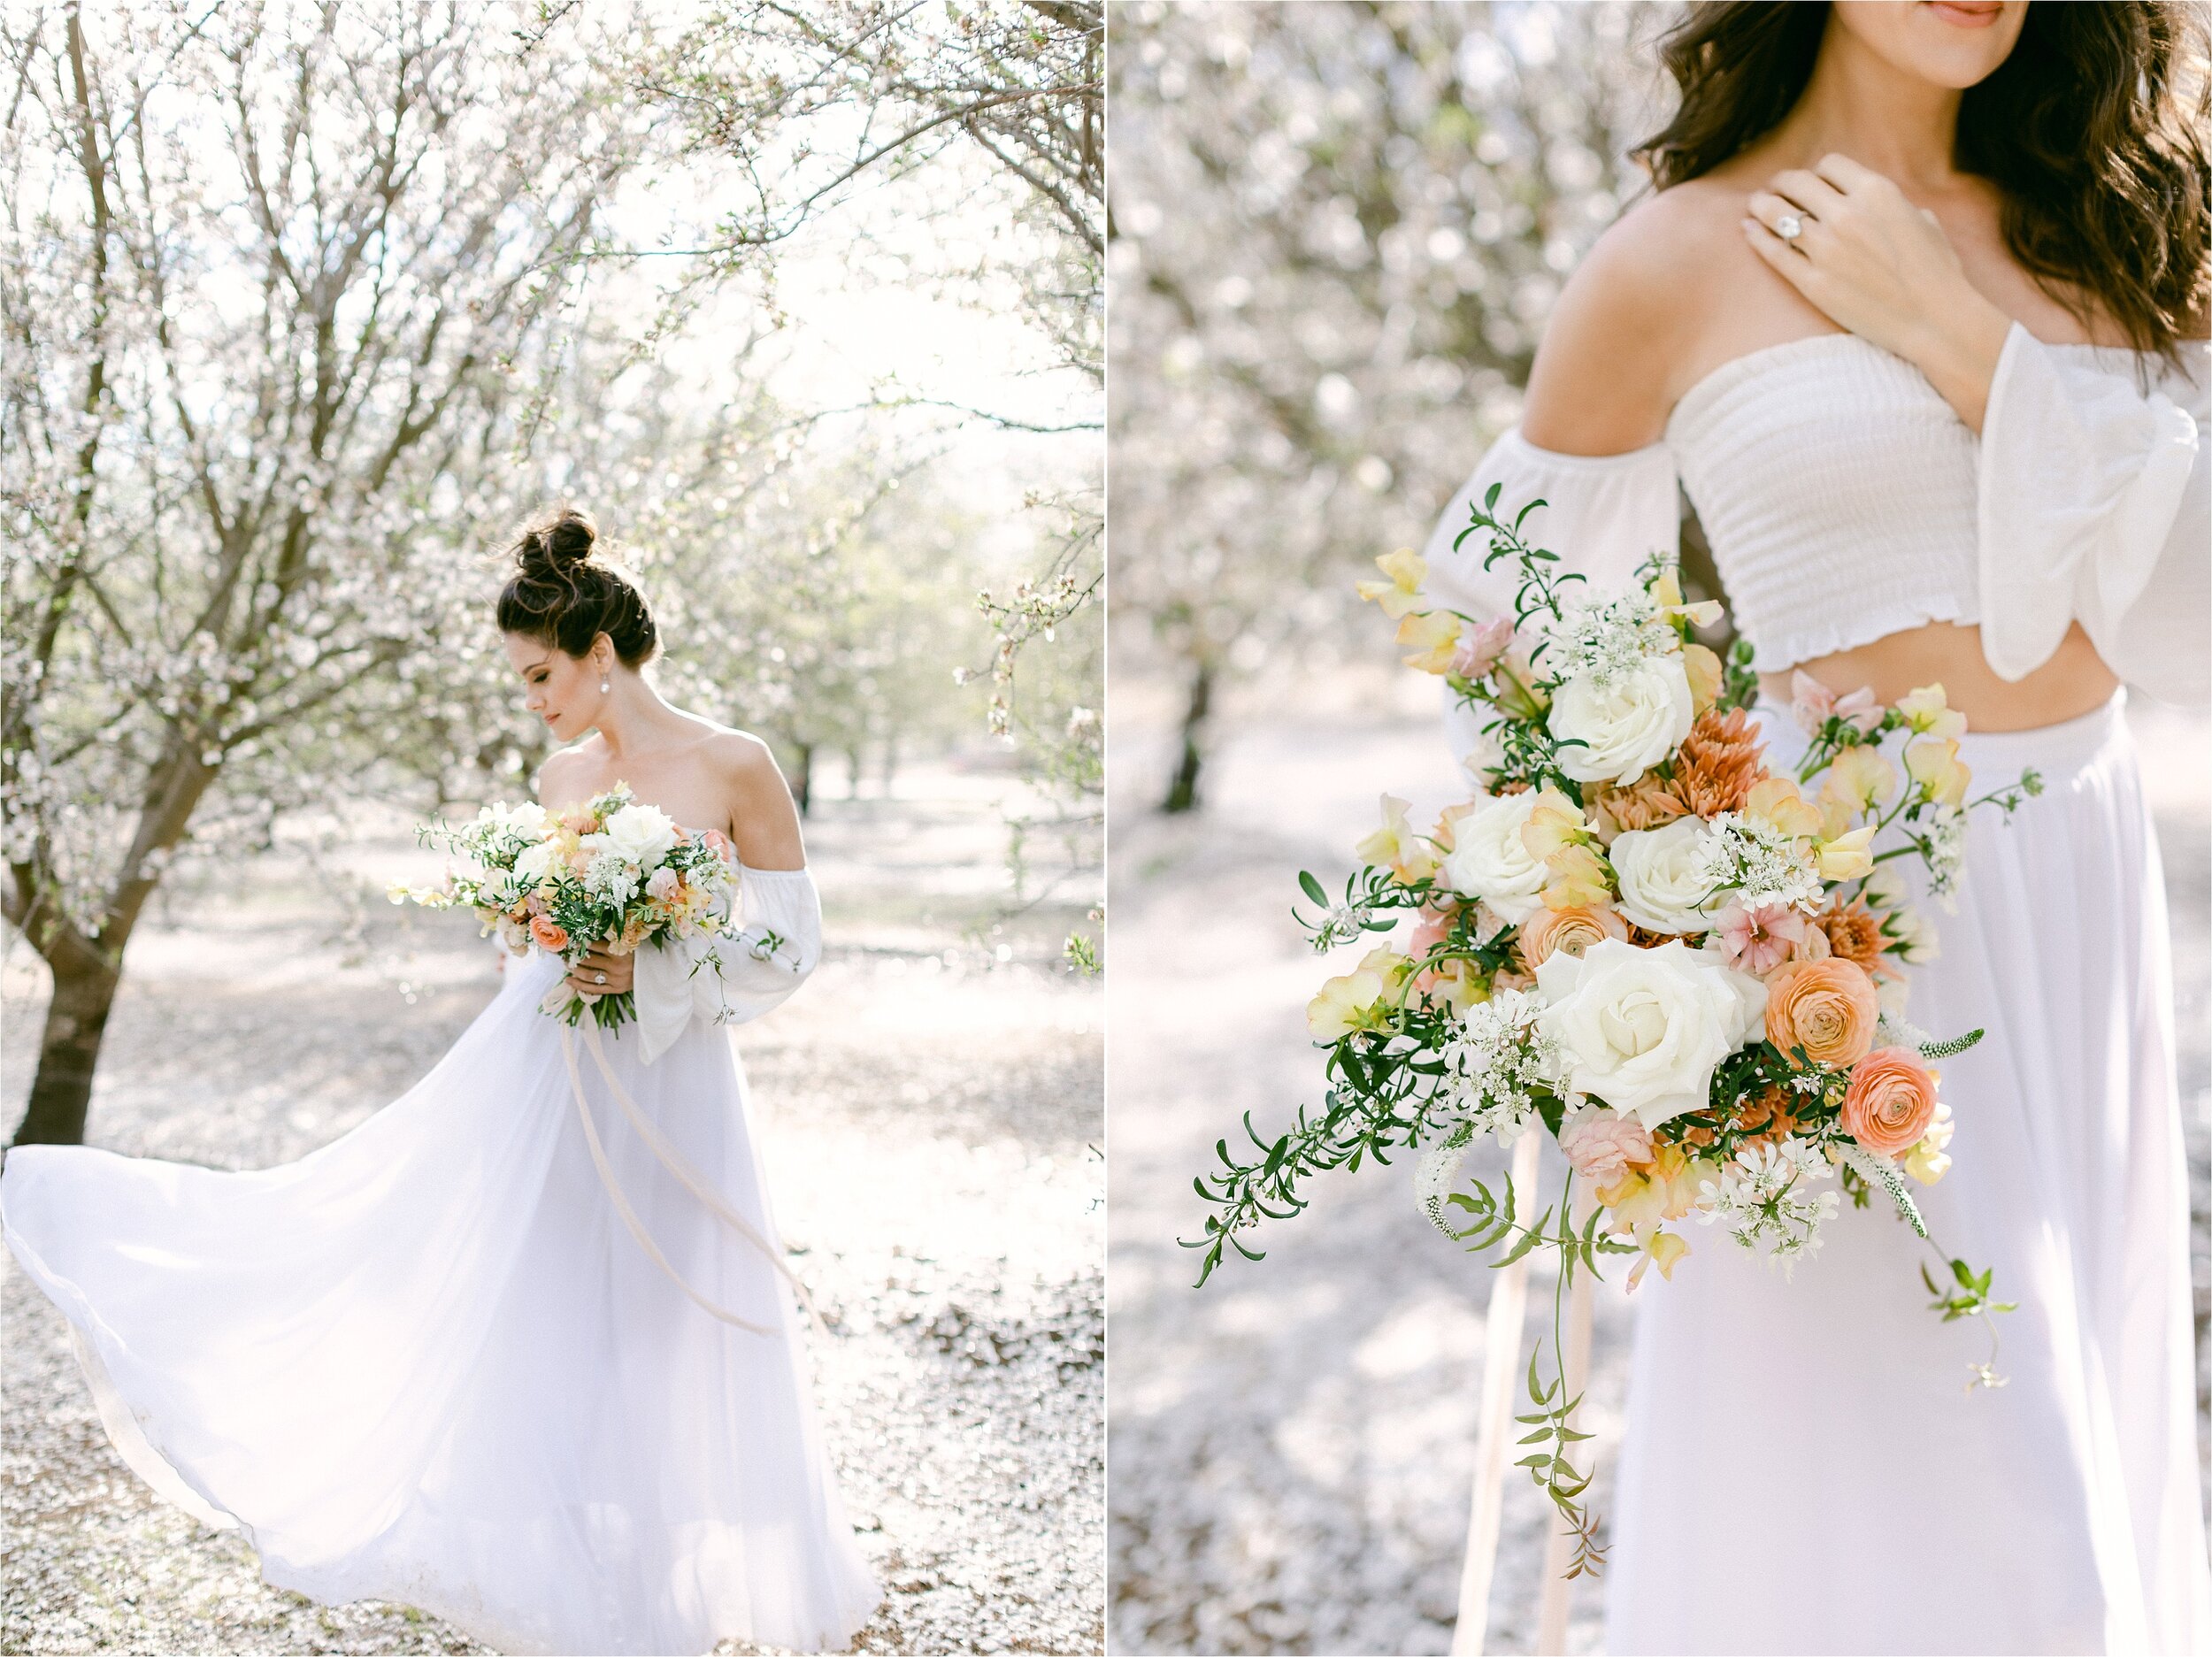 Southern California almond groves provide a dreamy backdrop for bride as she sways in the almond blossom orchard